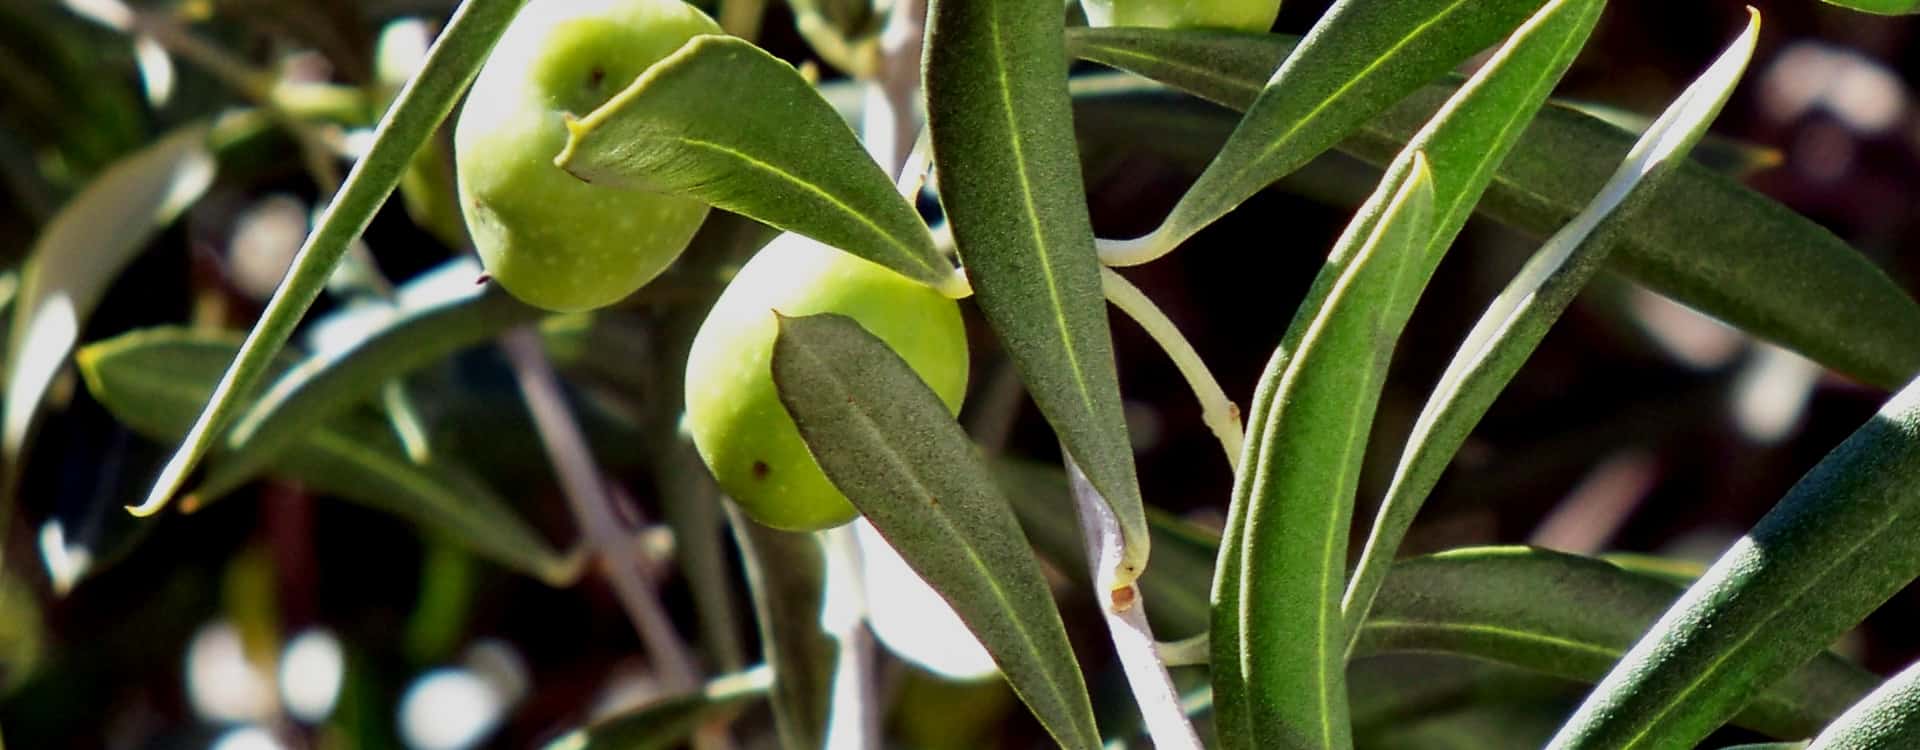 Researchers Uncover Neuroprotective Effect of Picholine Olive Oils